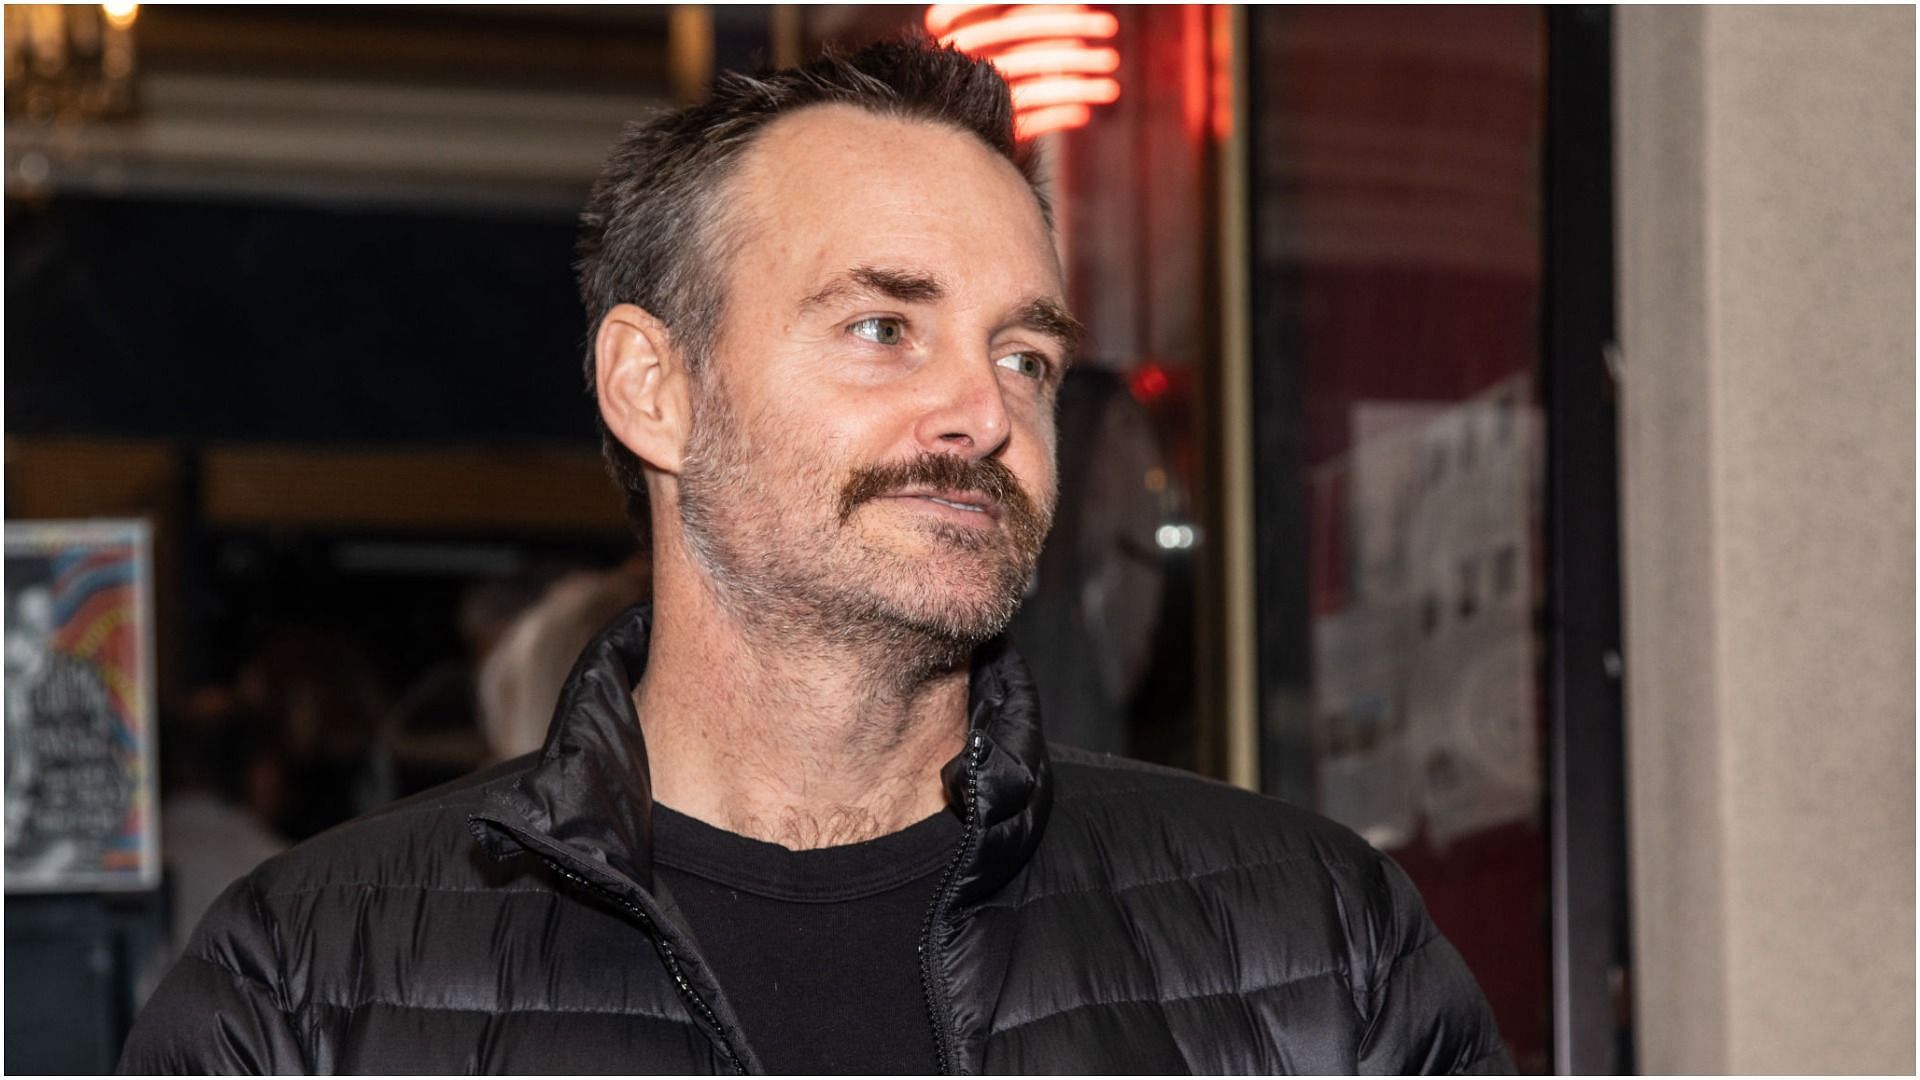 Will Forte revealed about his secret wedding to Olivia Modling (Image by Miikka Skaffari via Getty Images)